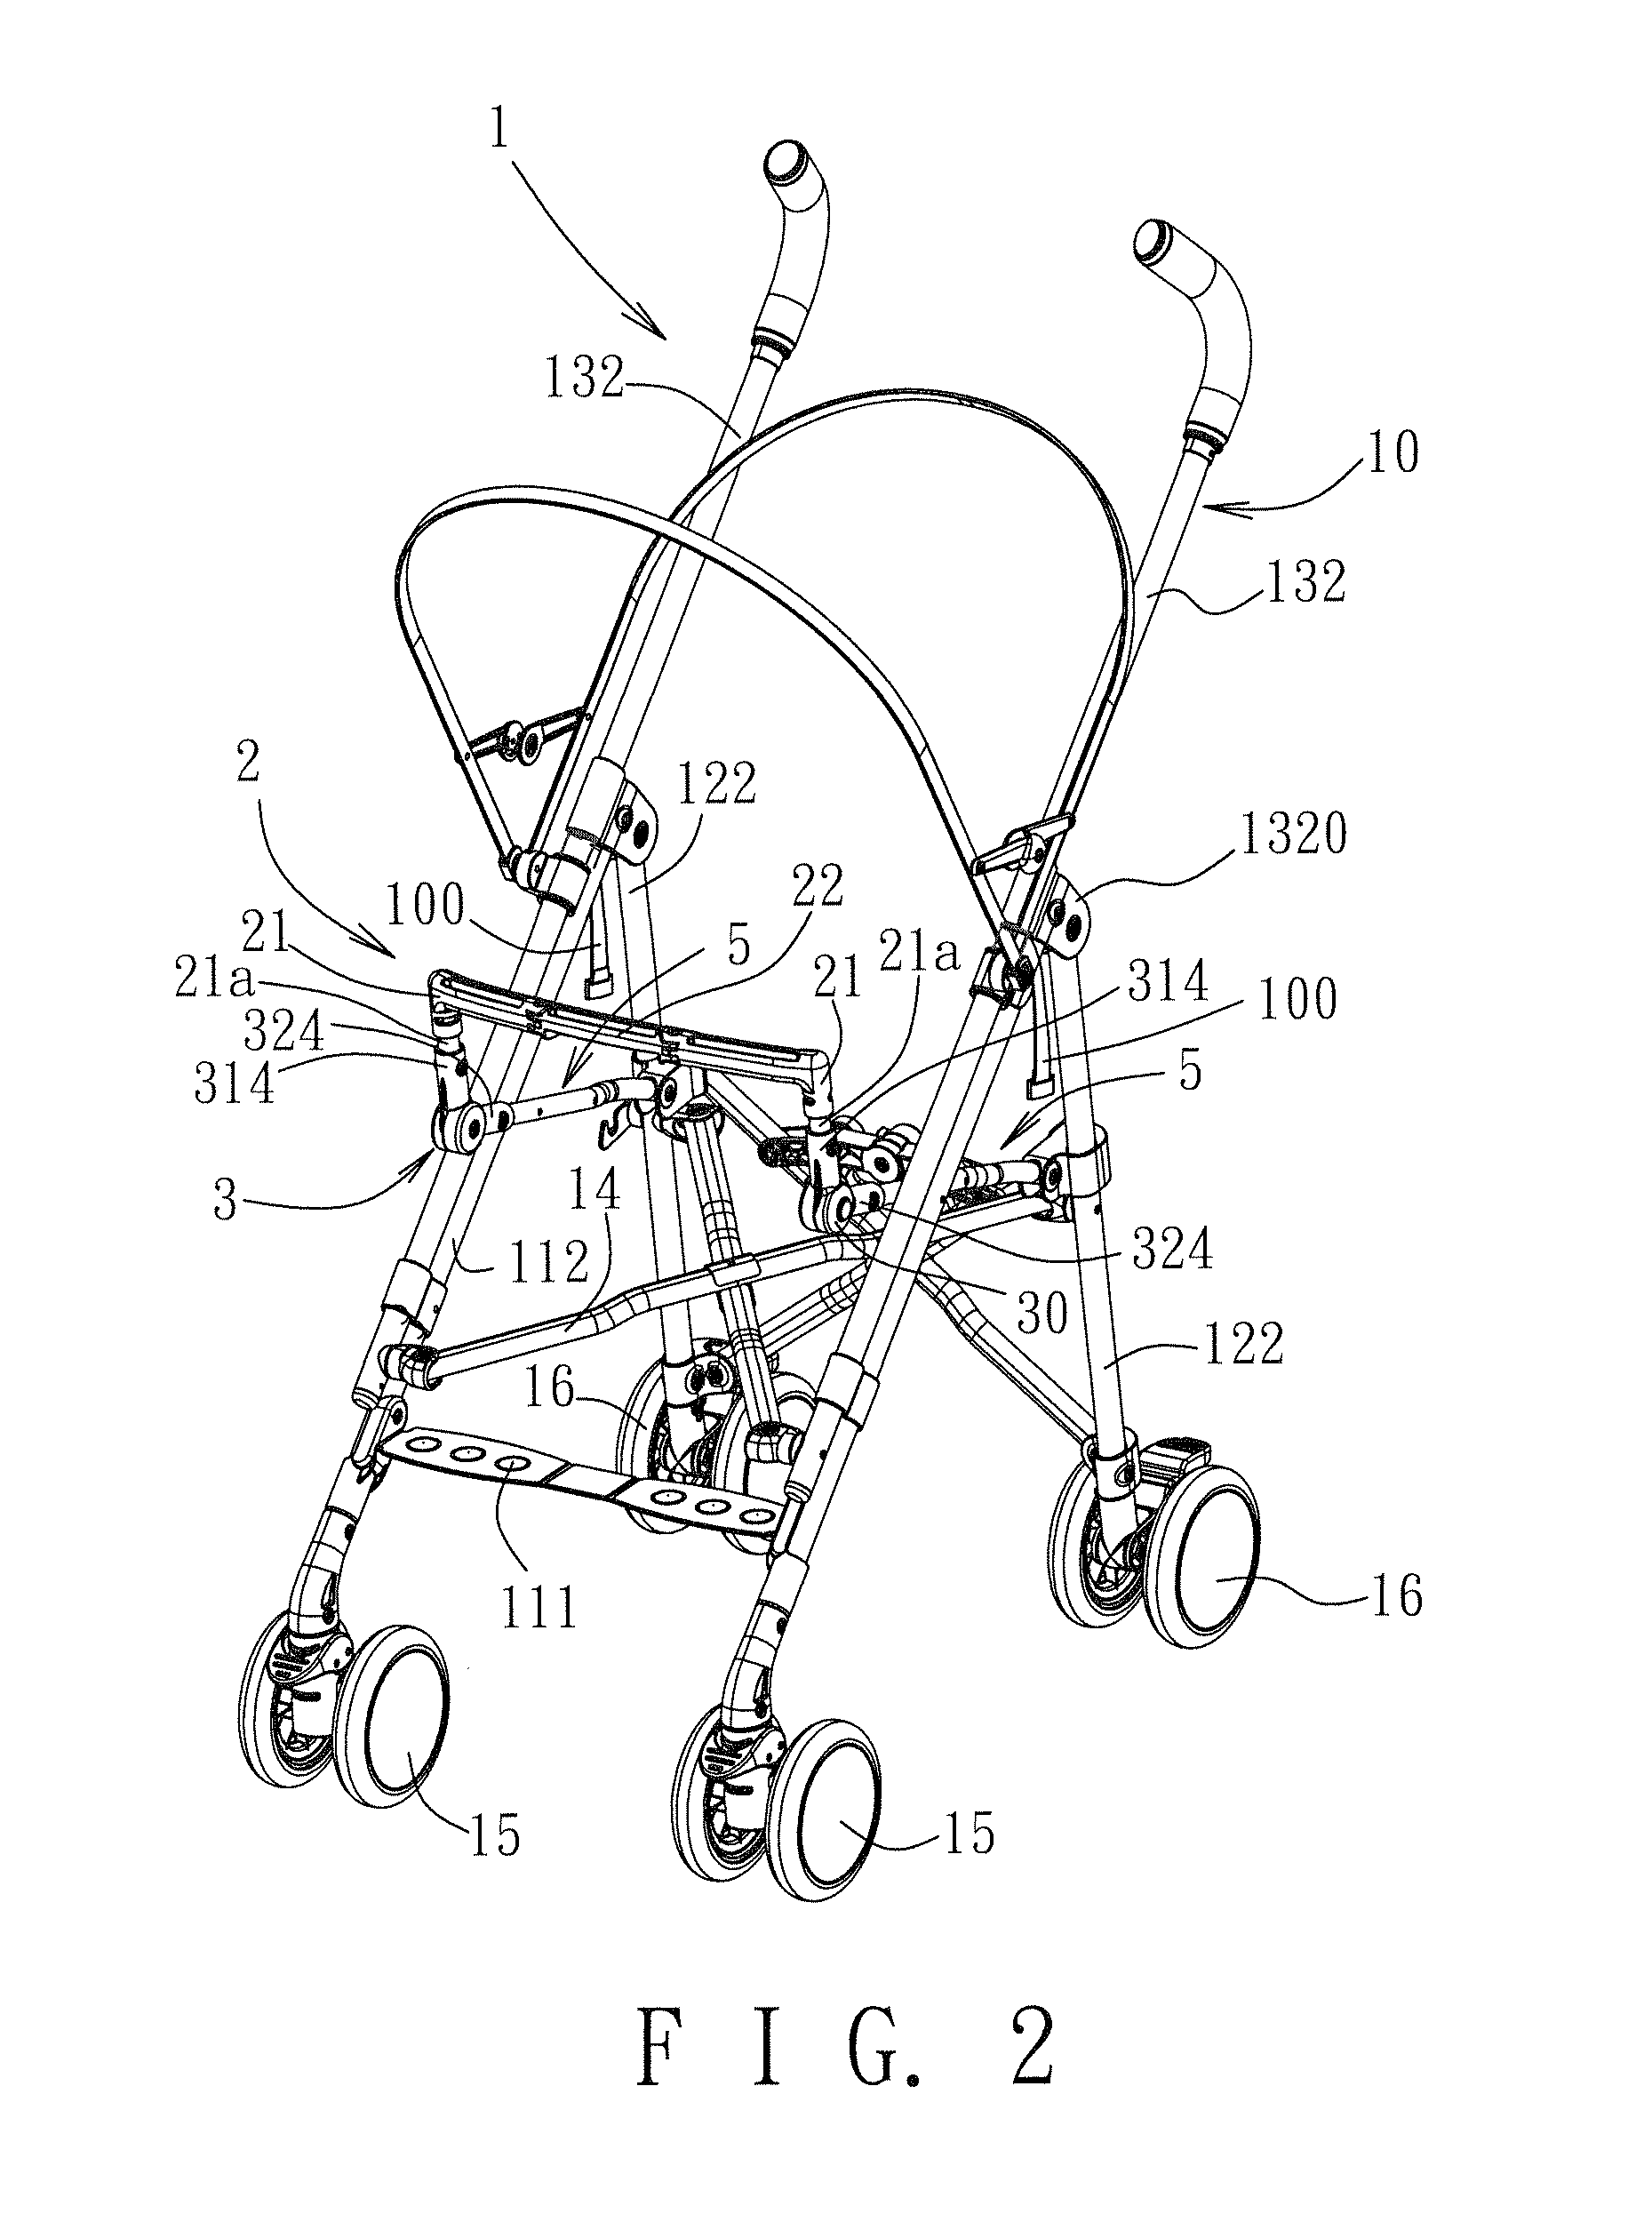 Stroller connectable with a car seat